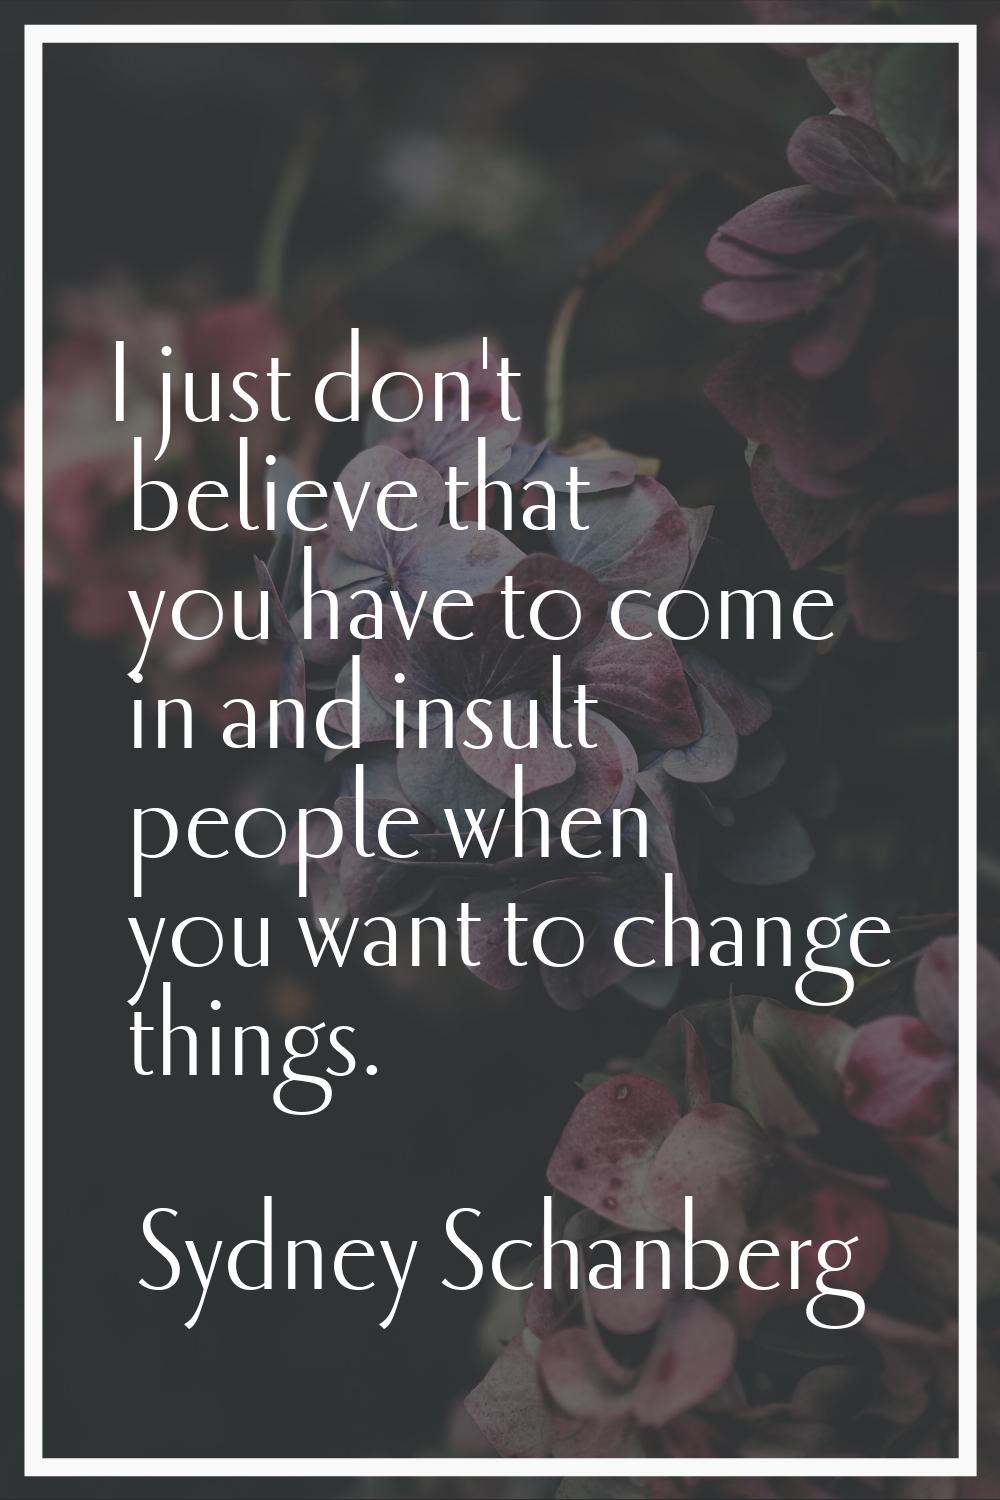 I just don't believe that you have to come in and insult people when you want to change things.